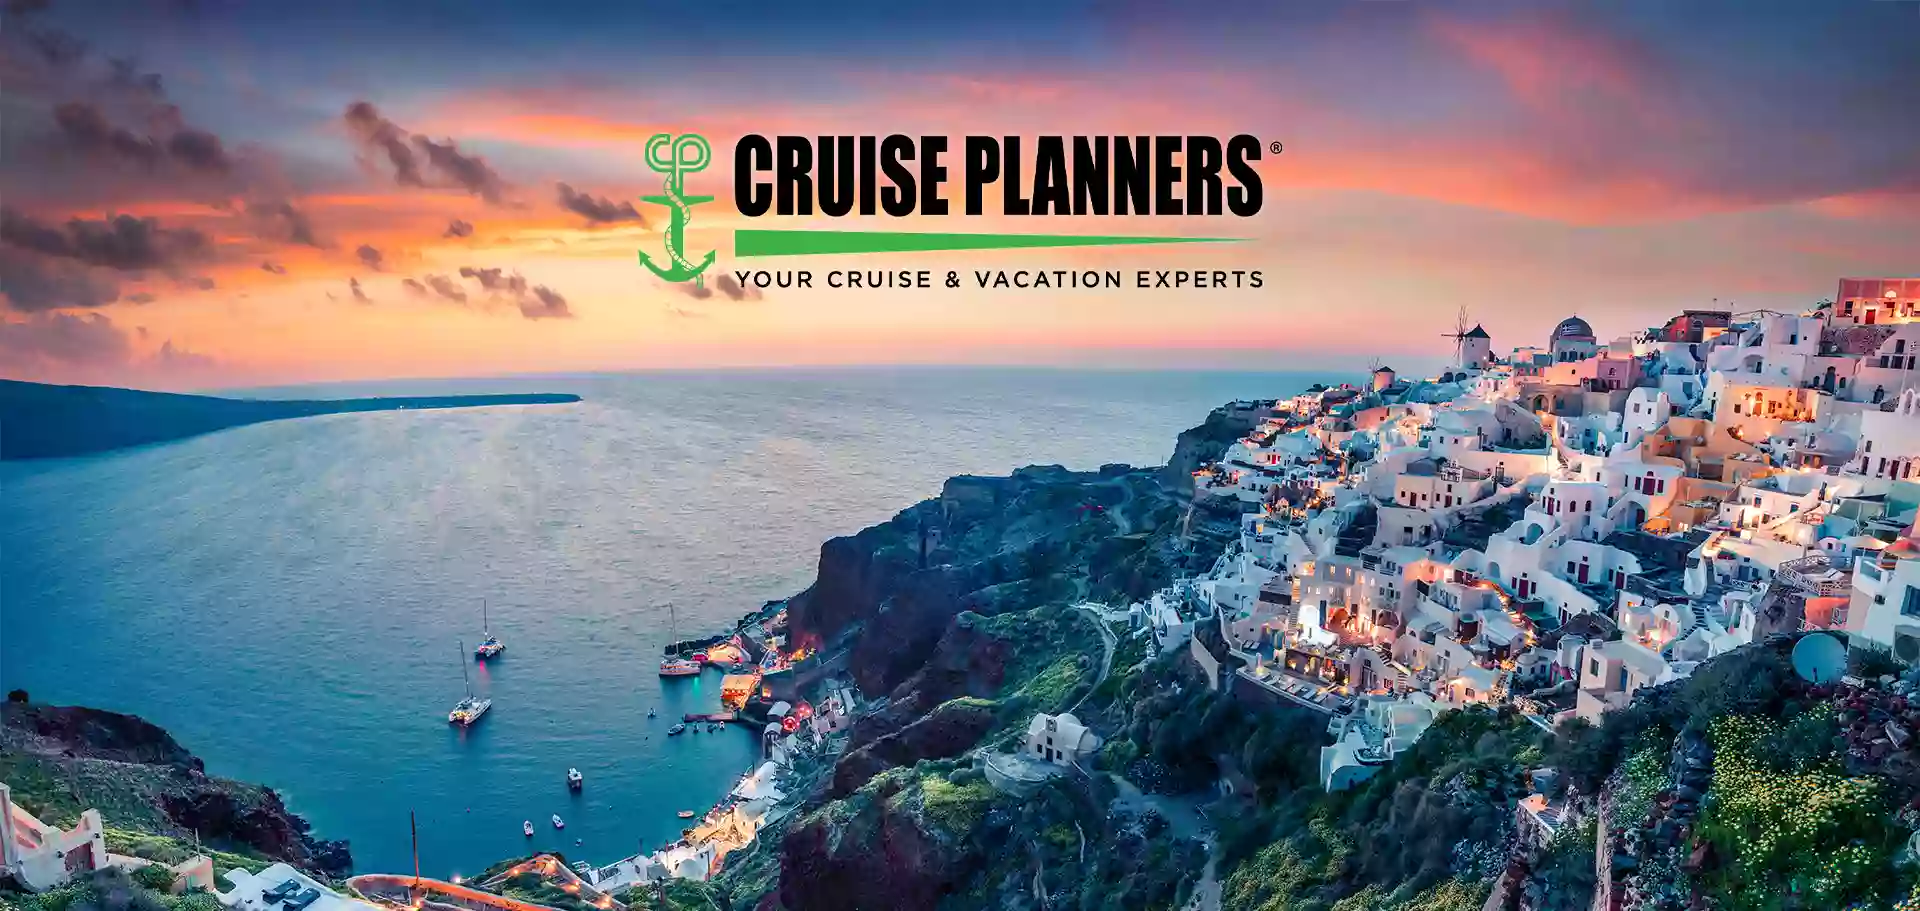 Cruise Planners - Book Another Cruise!